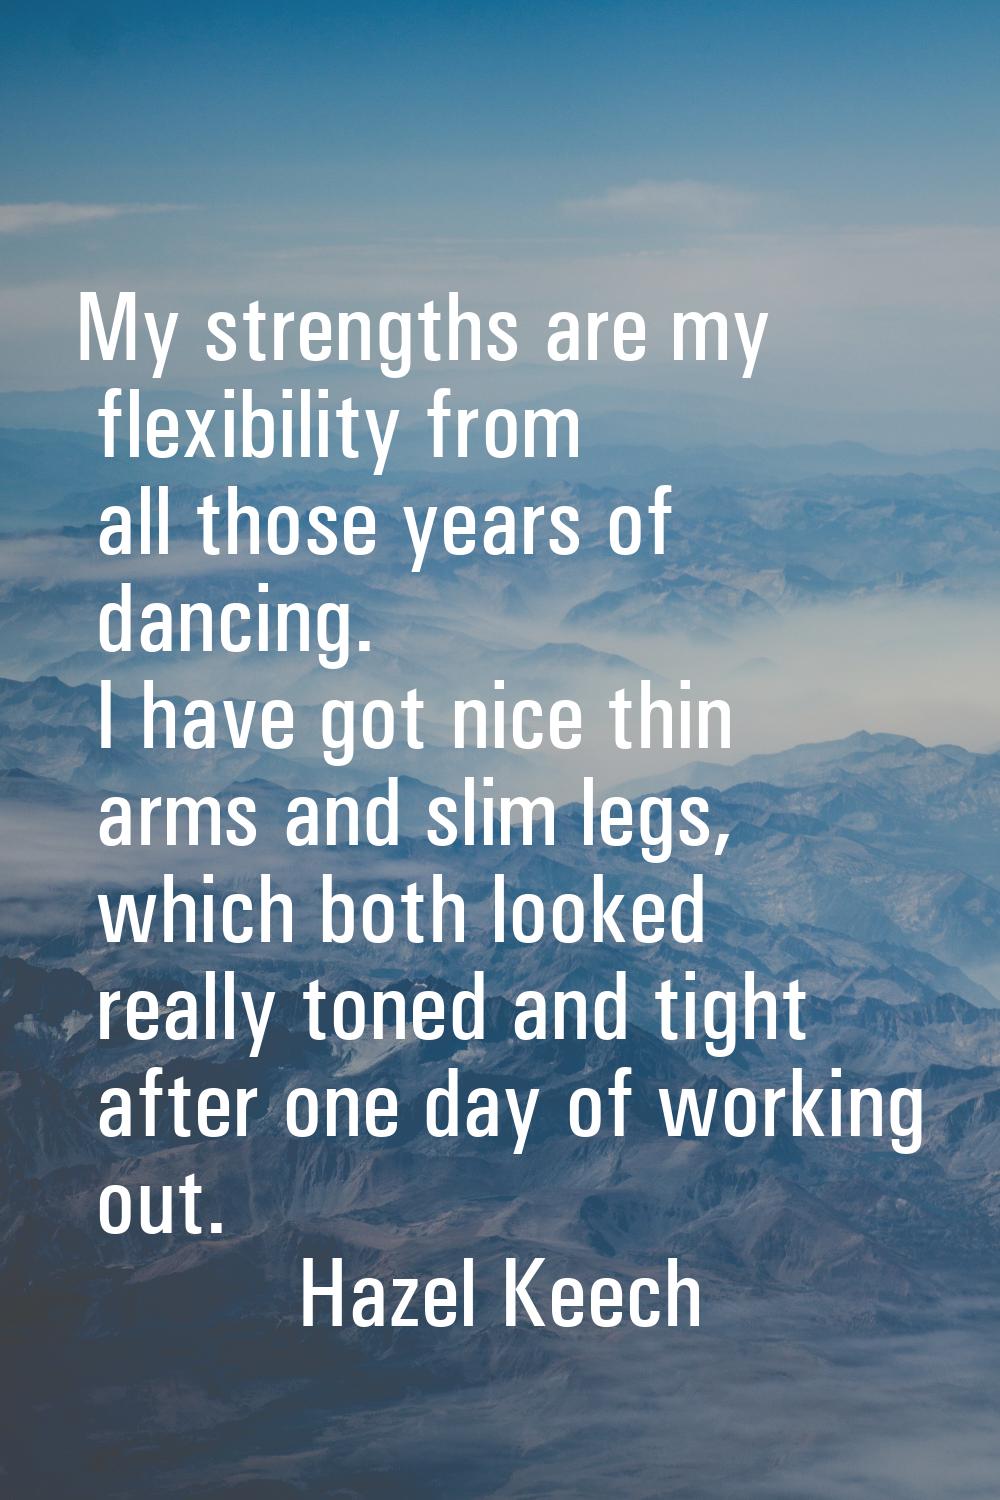 My strengths are my flexibility from all those years of dancing. I have got nice thin arms and slim